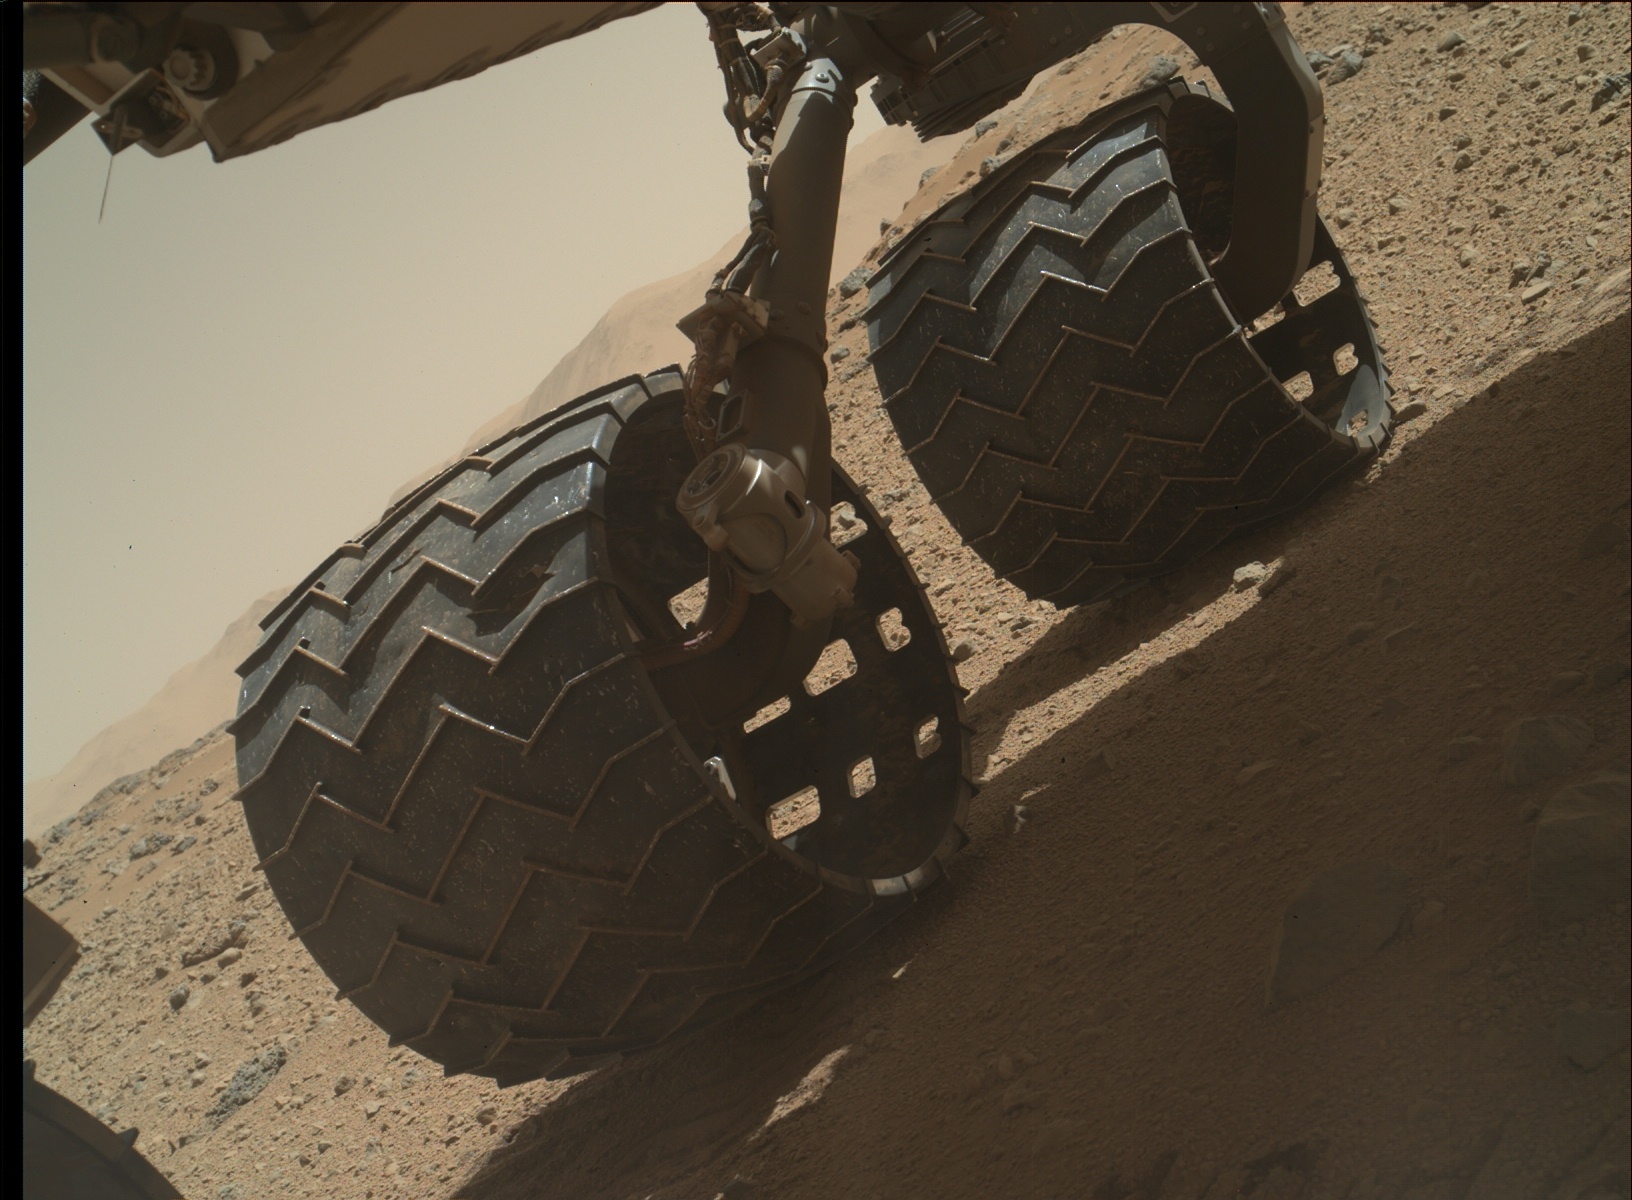 Nasa's Mars rover Curiosity acquired this image using its Mars Hand Lens Imager (MAHLI) on Sol 549